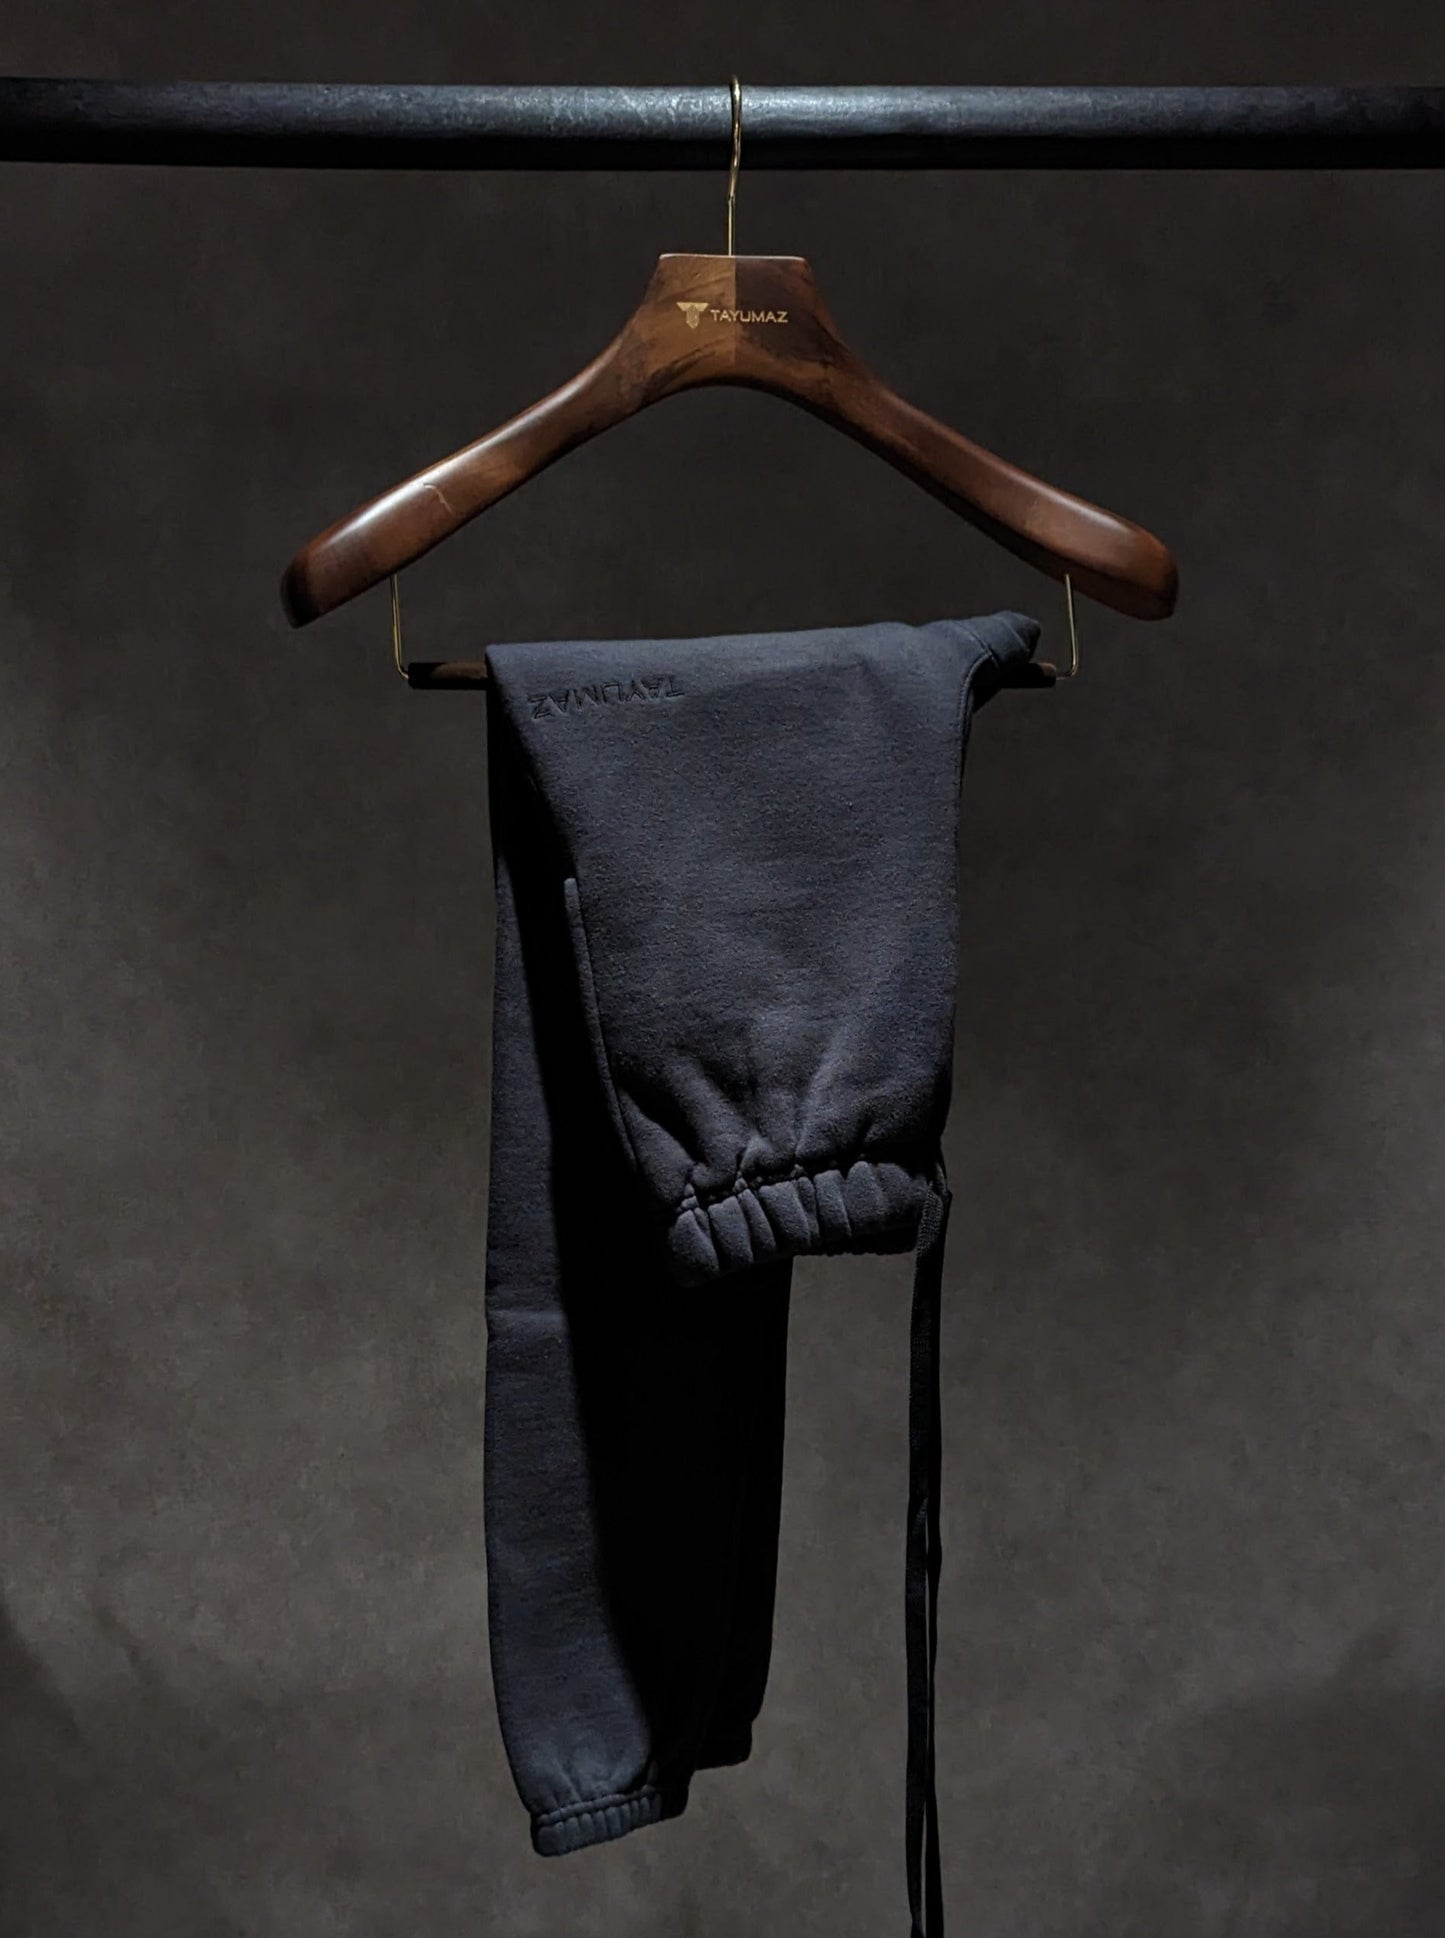 Washed cotton sweatpants in black